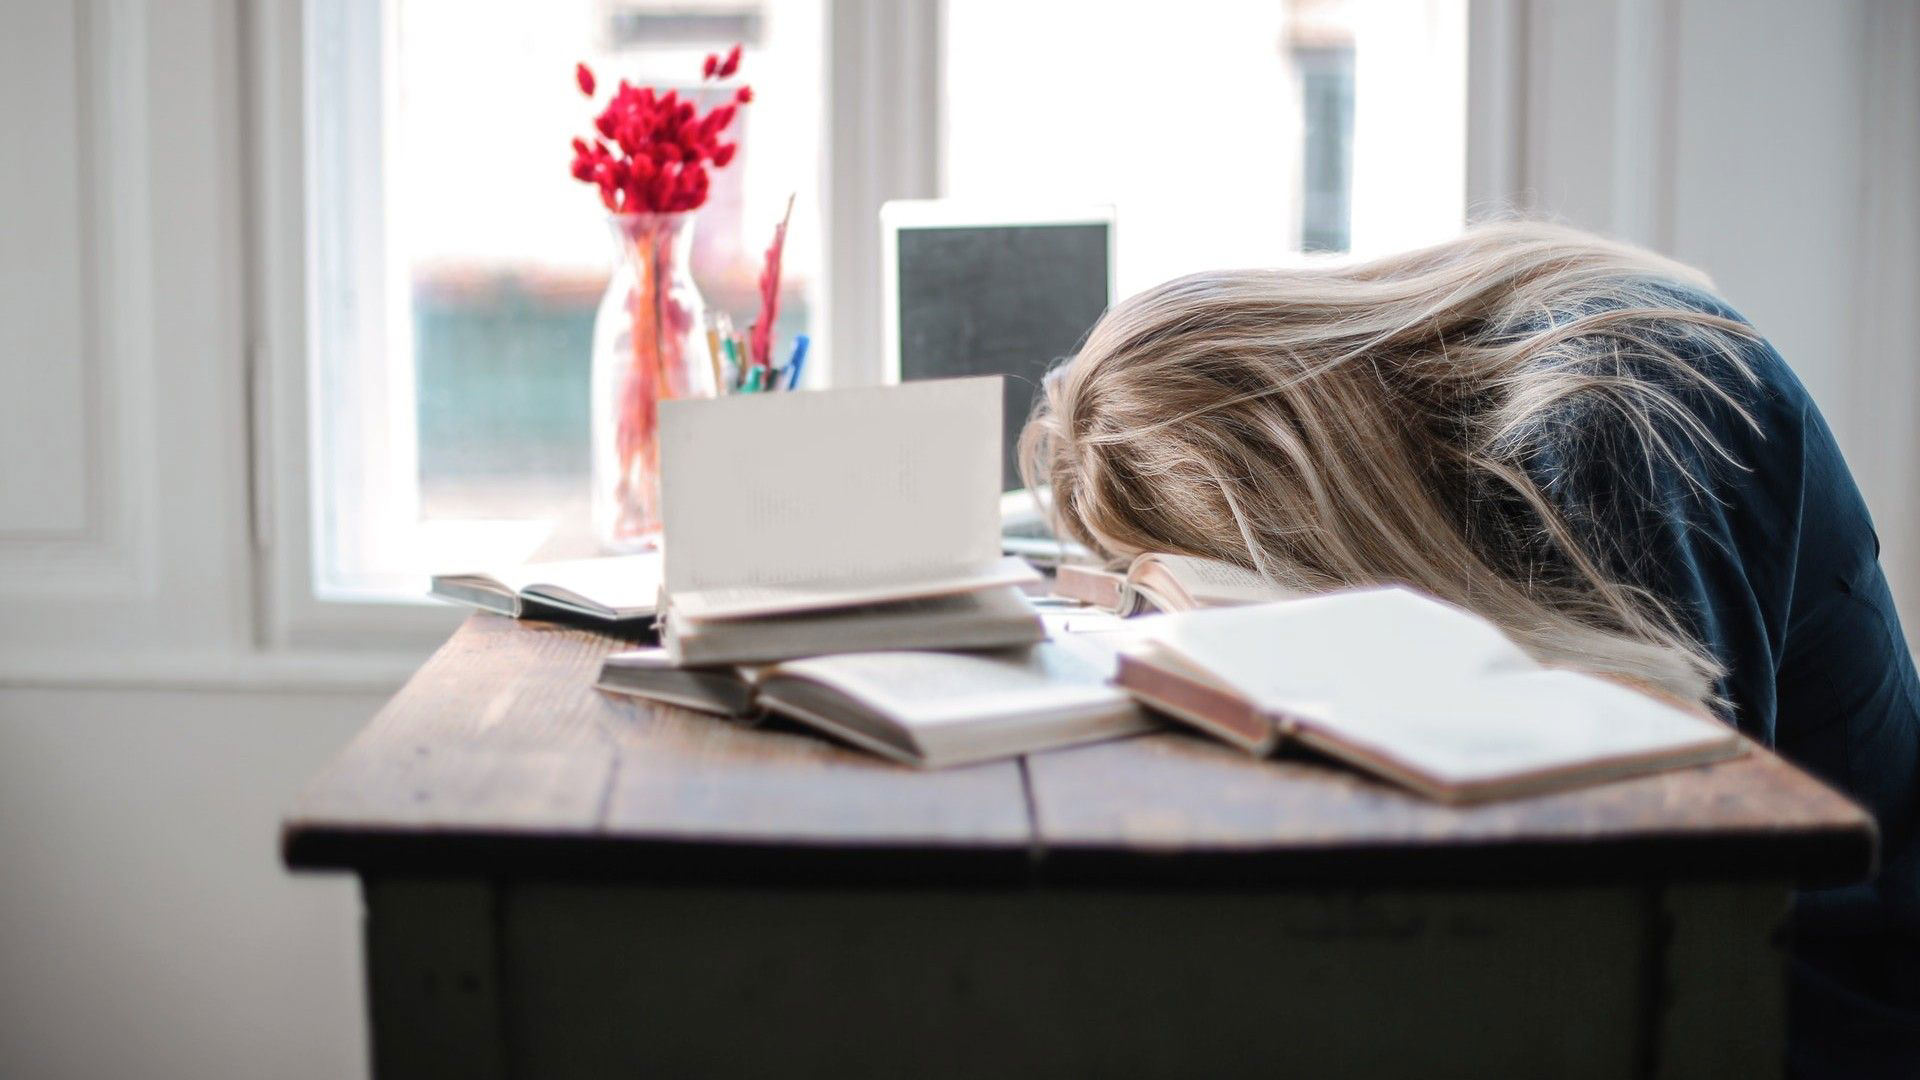 Sleep deprivation: the effects and the foods that could help